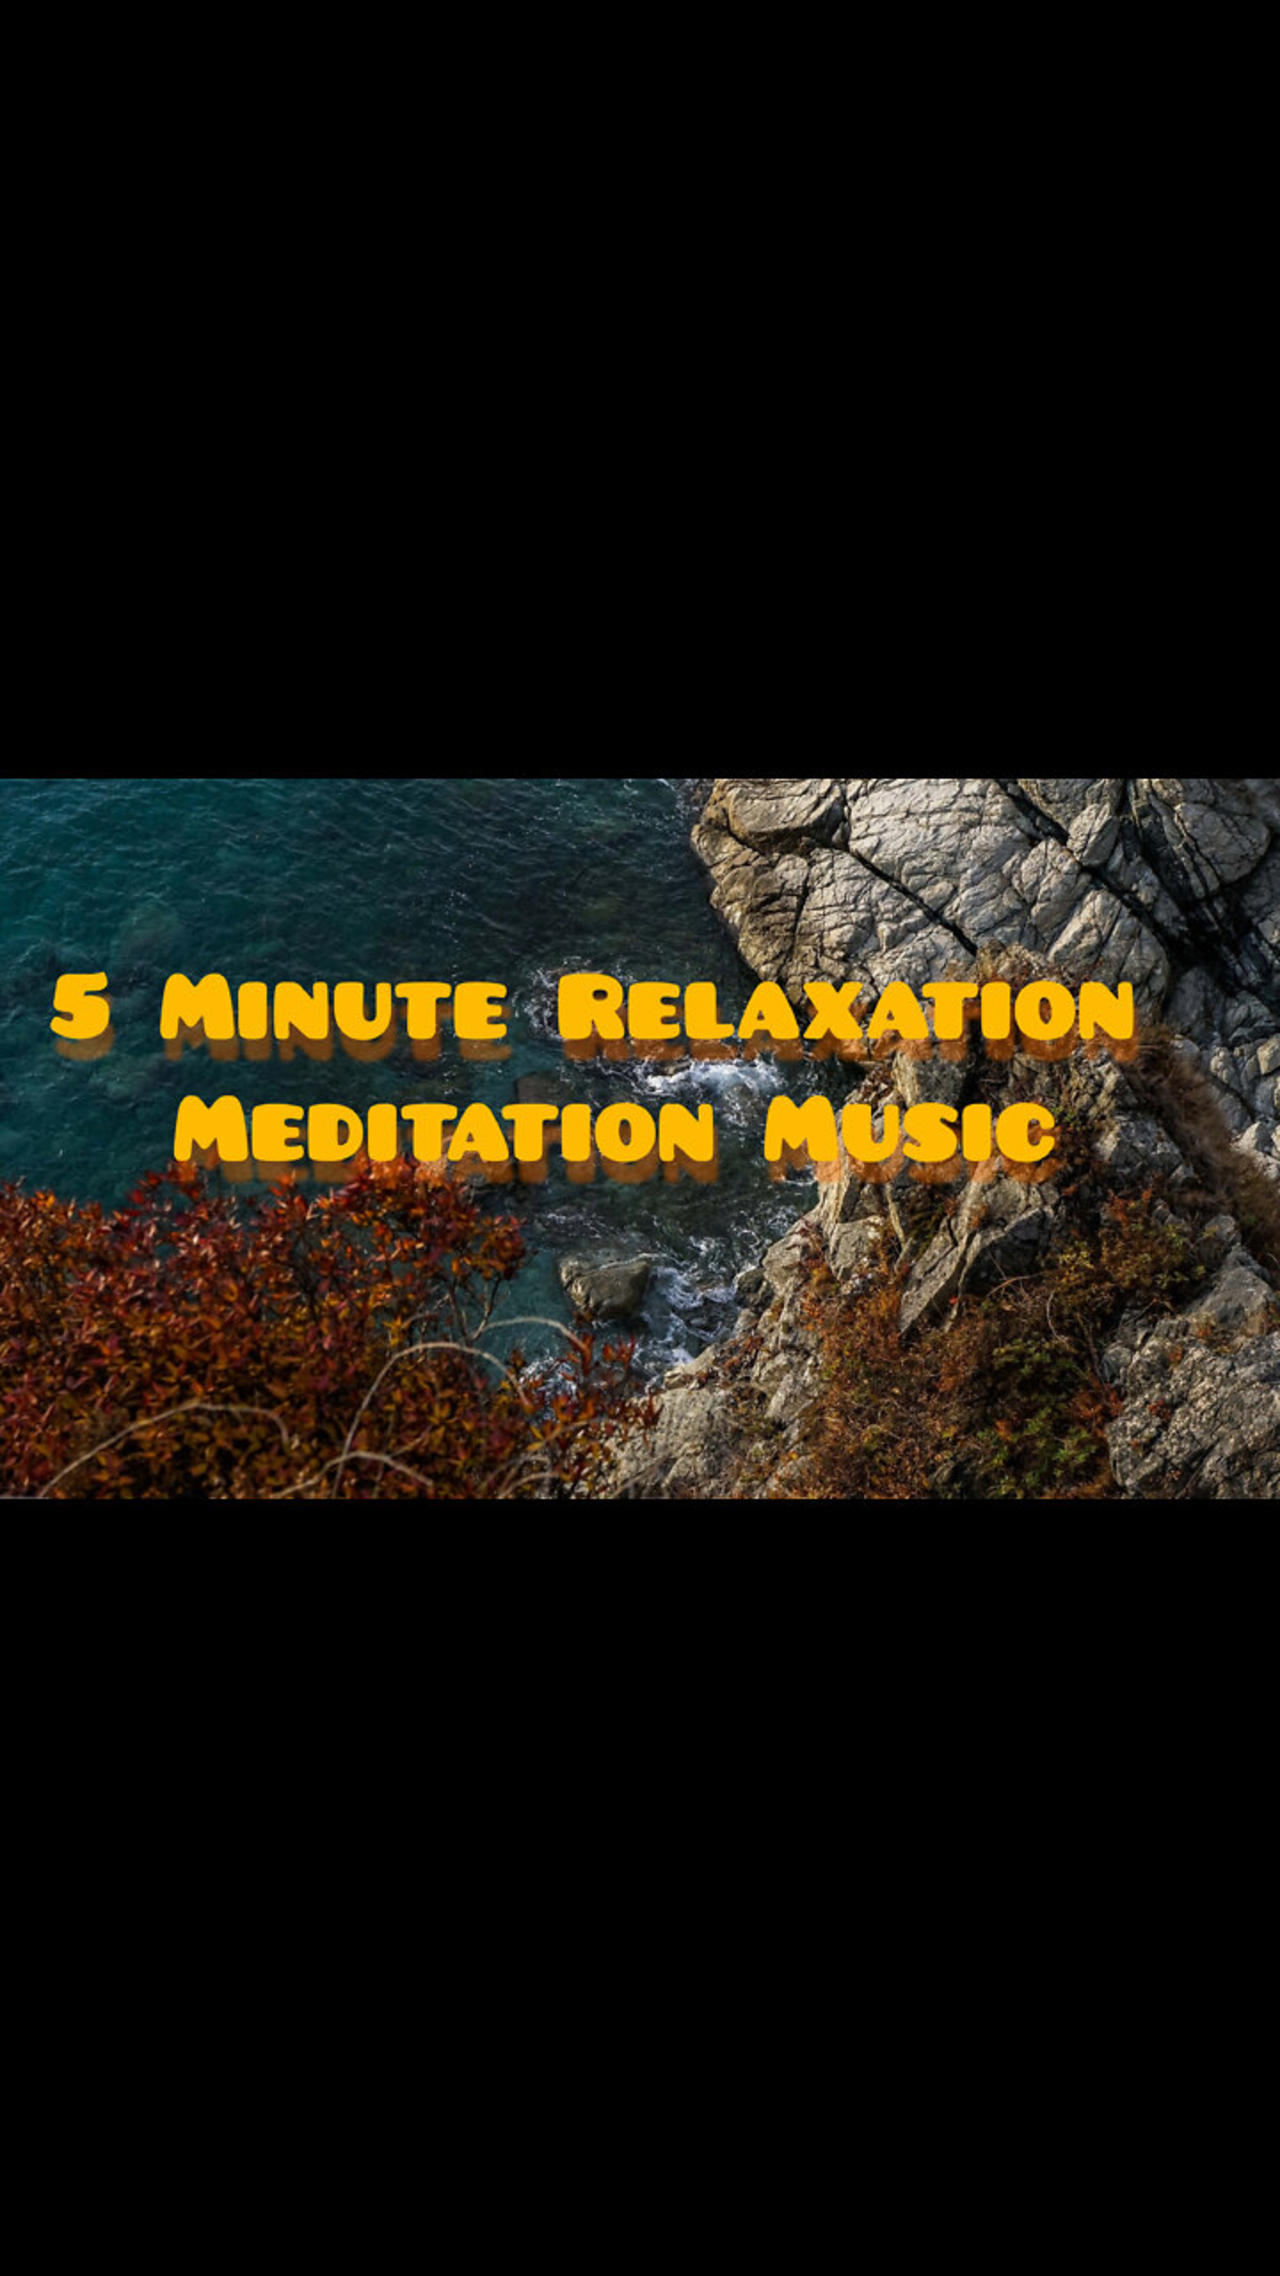 5 Minute Relaxation Meditation Music